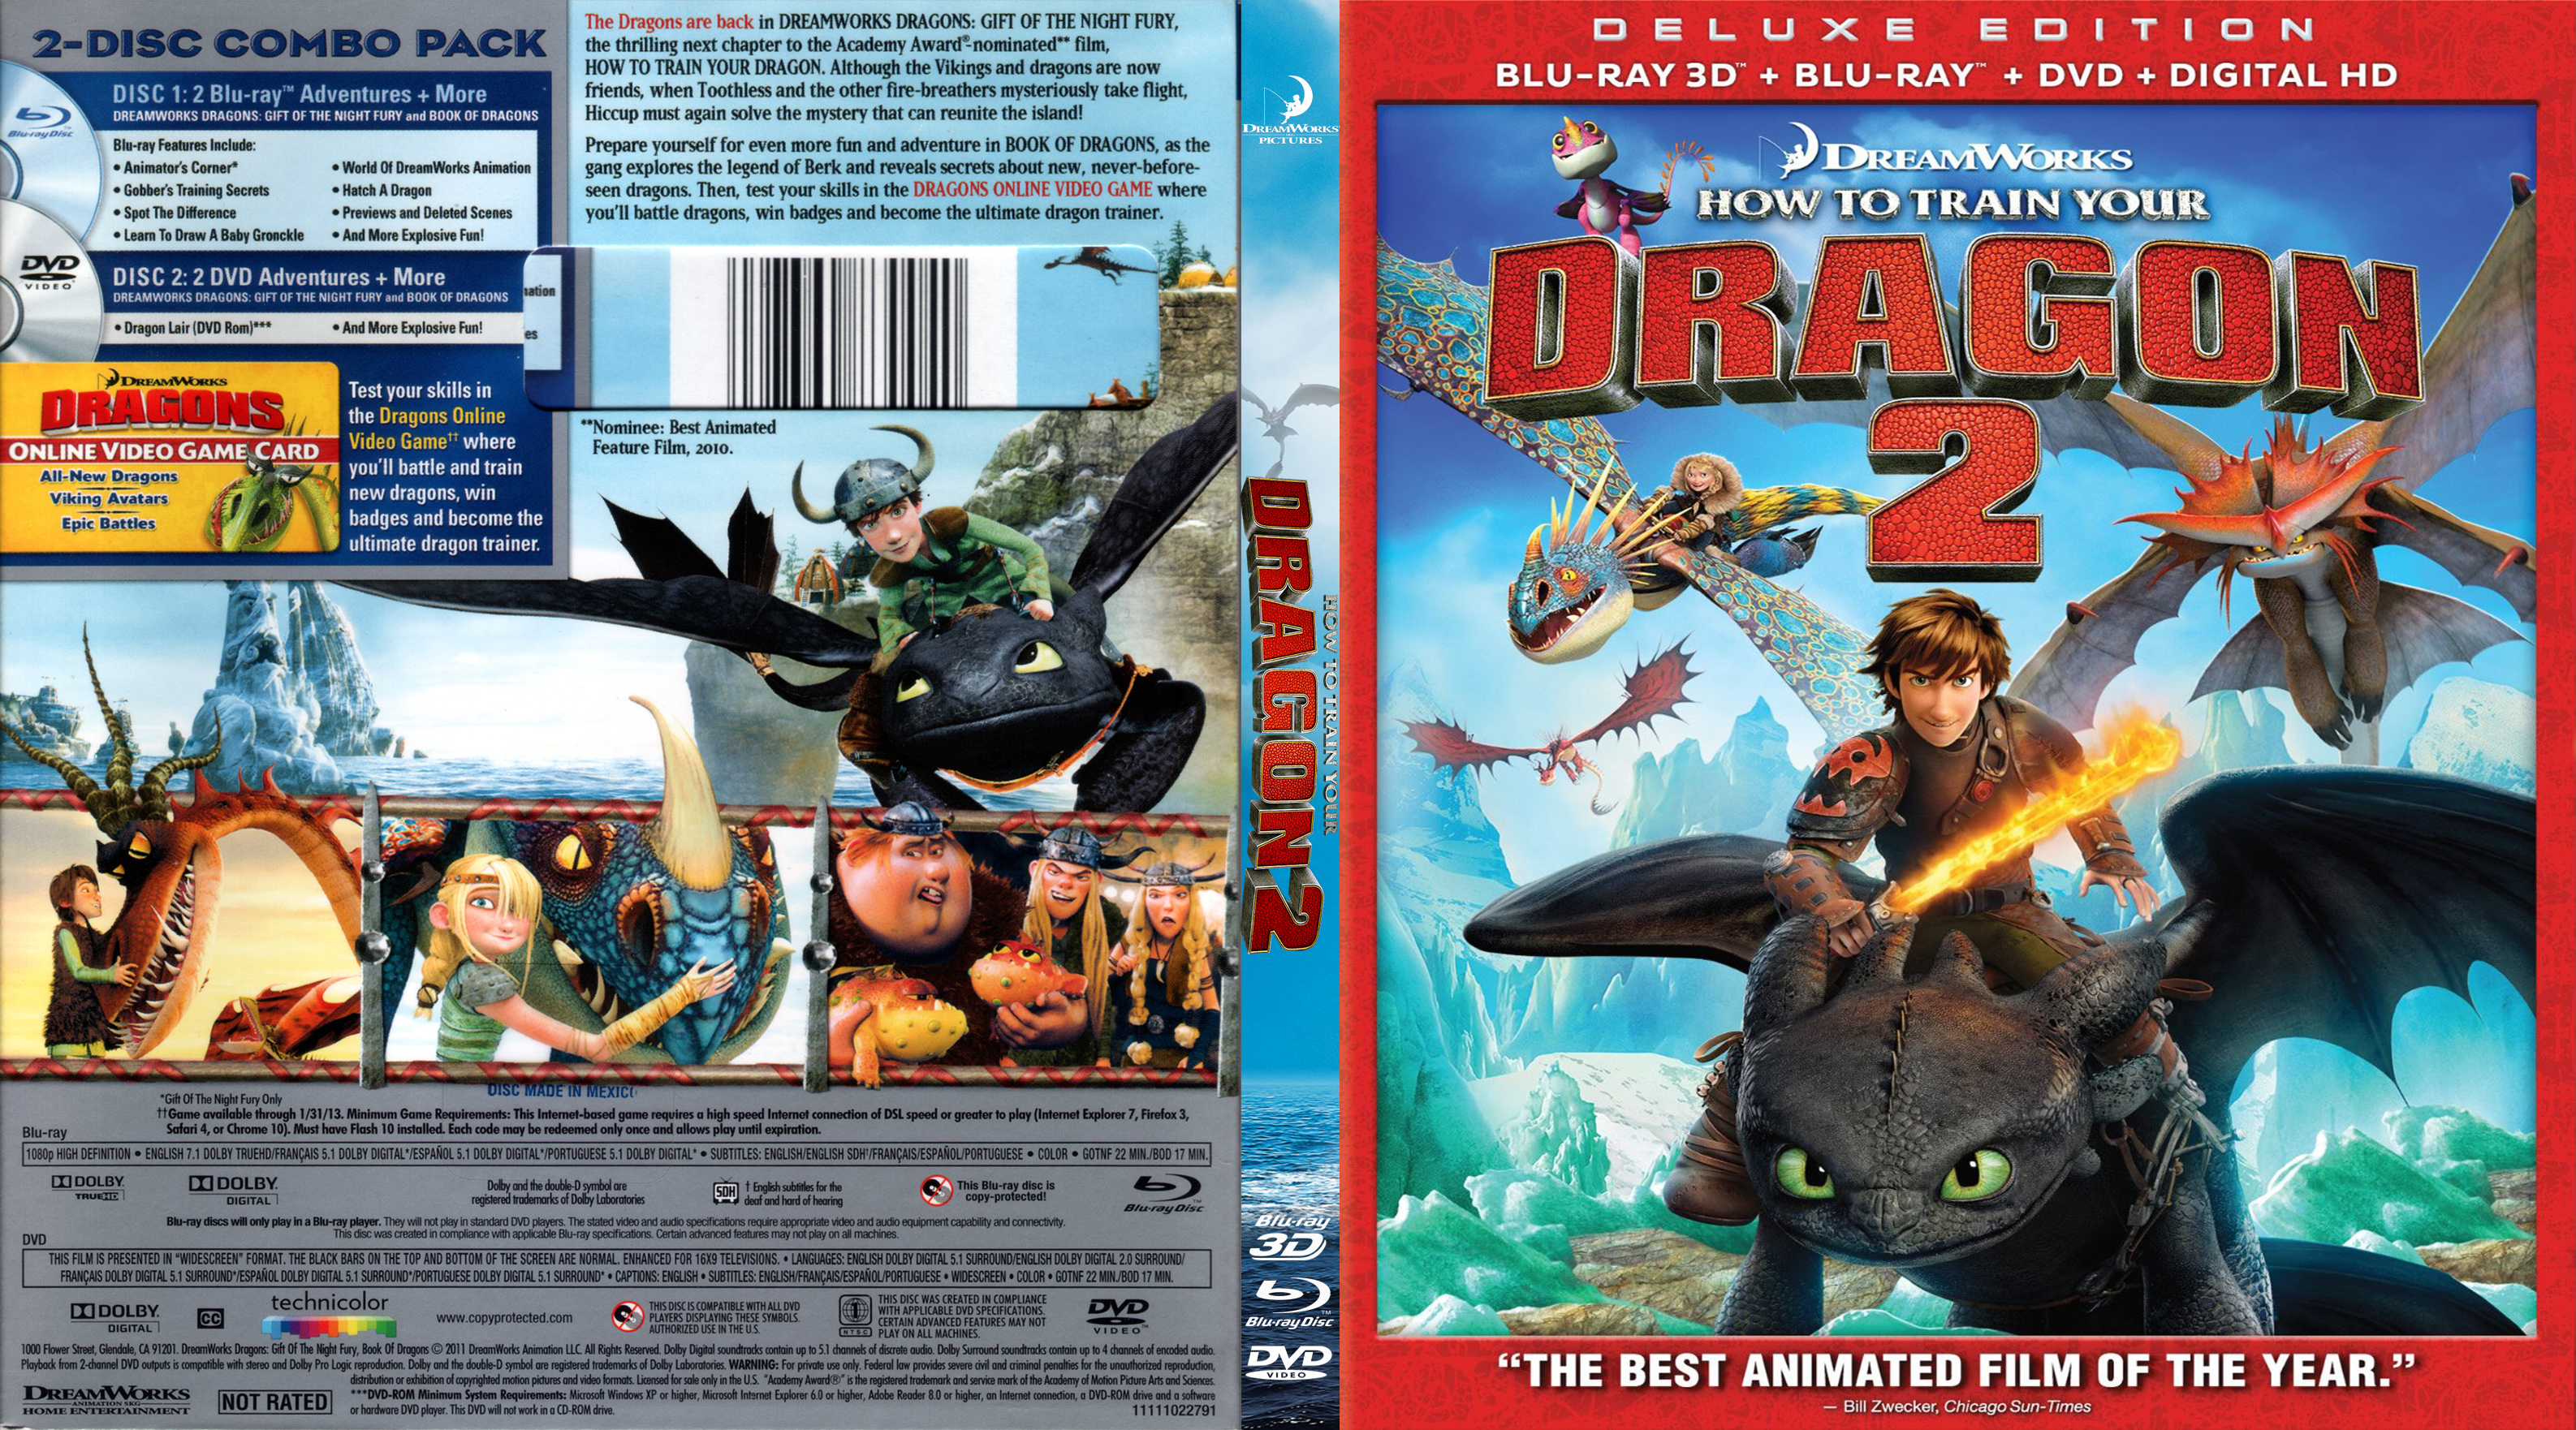 how to train your dragon 2 dvd cover art